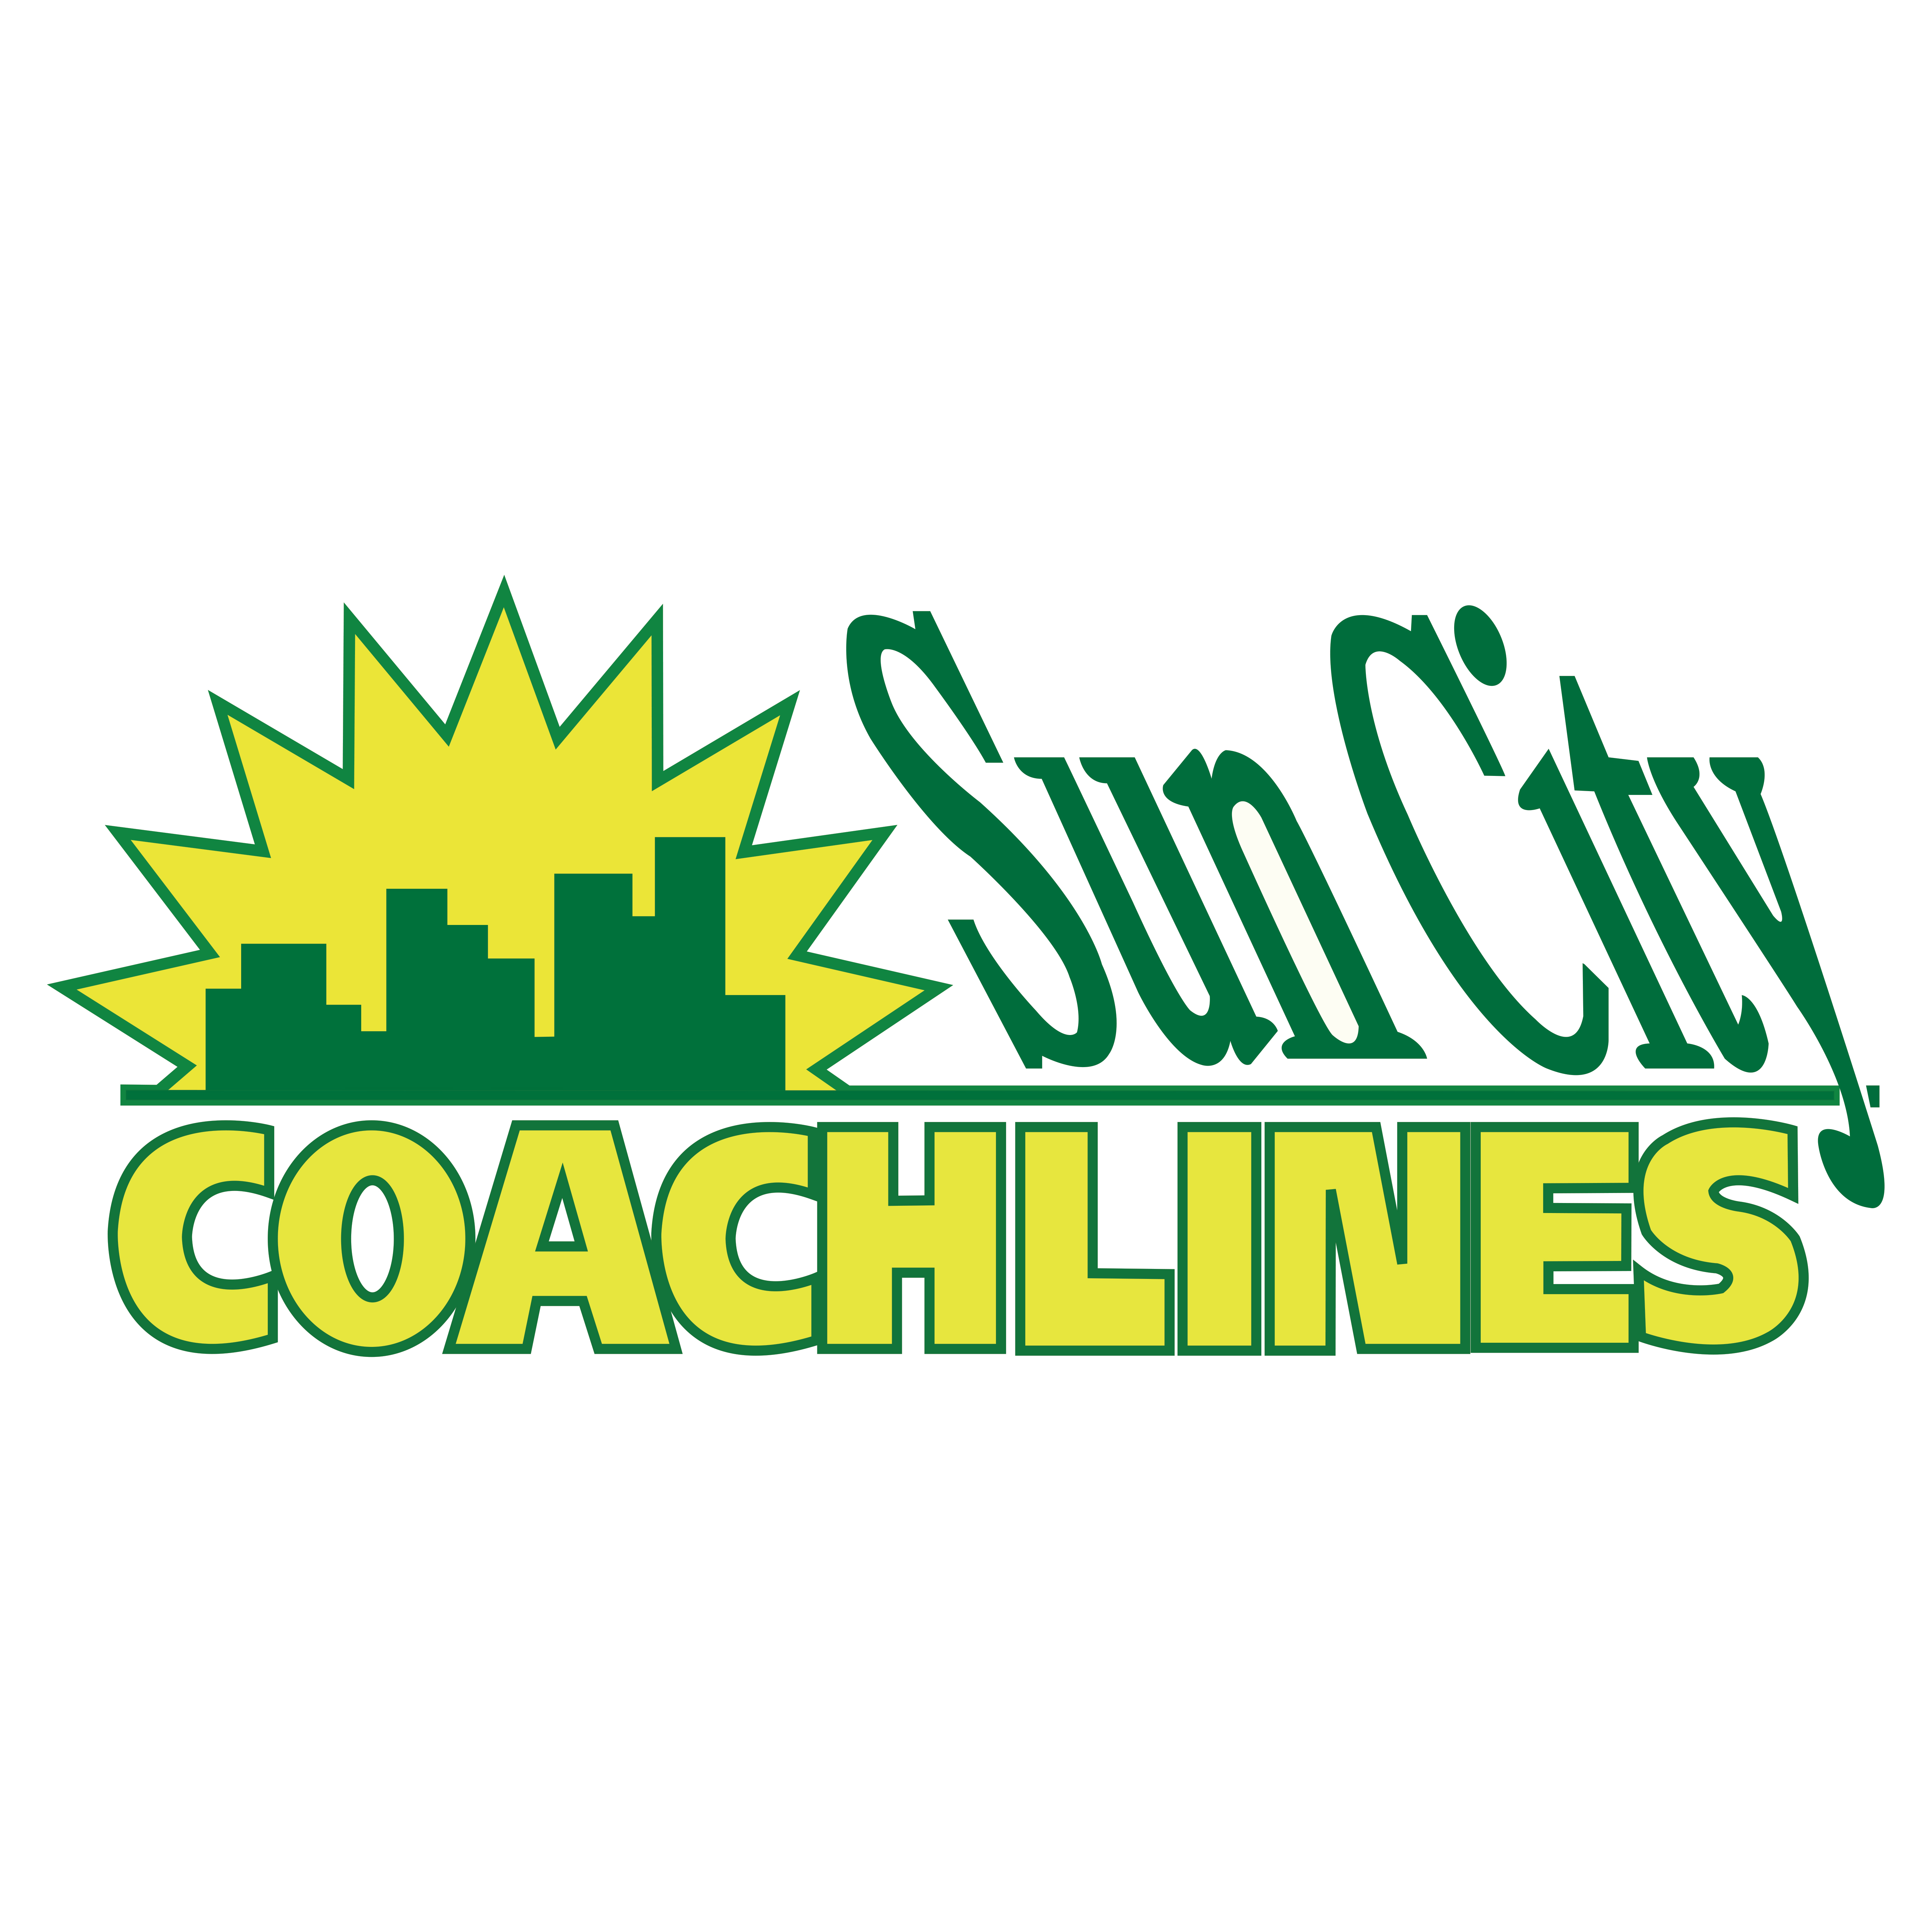 Suncity Couriers and Coachlines